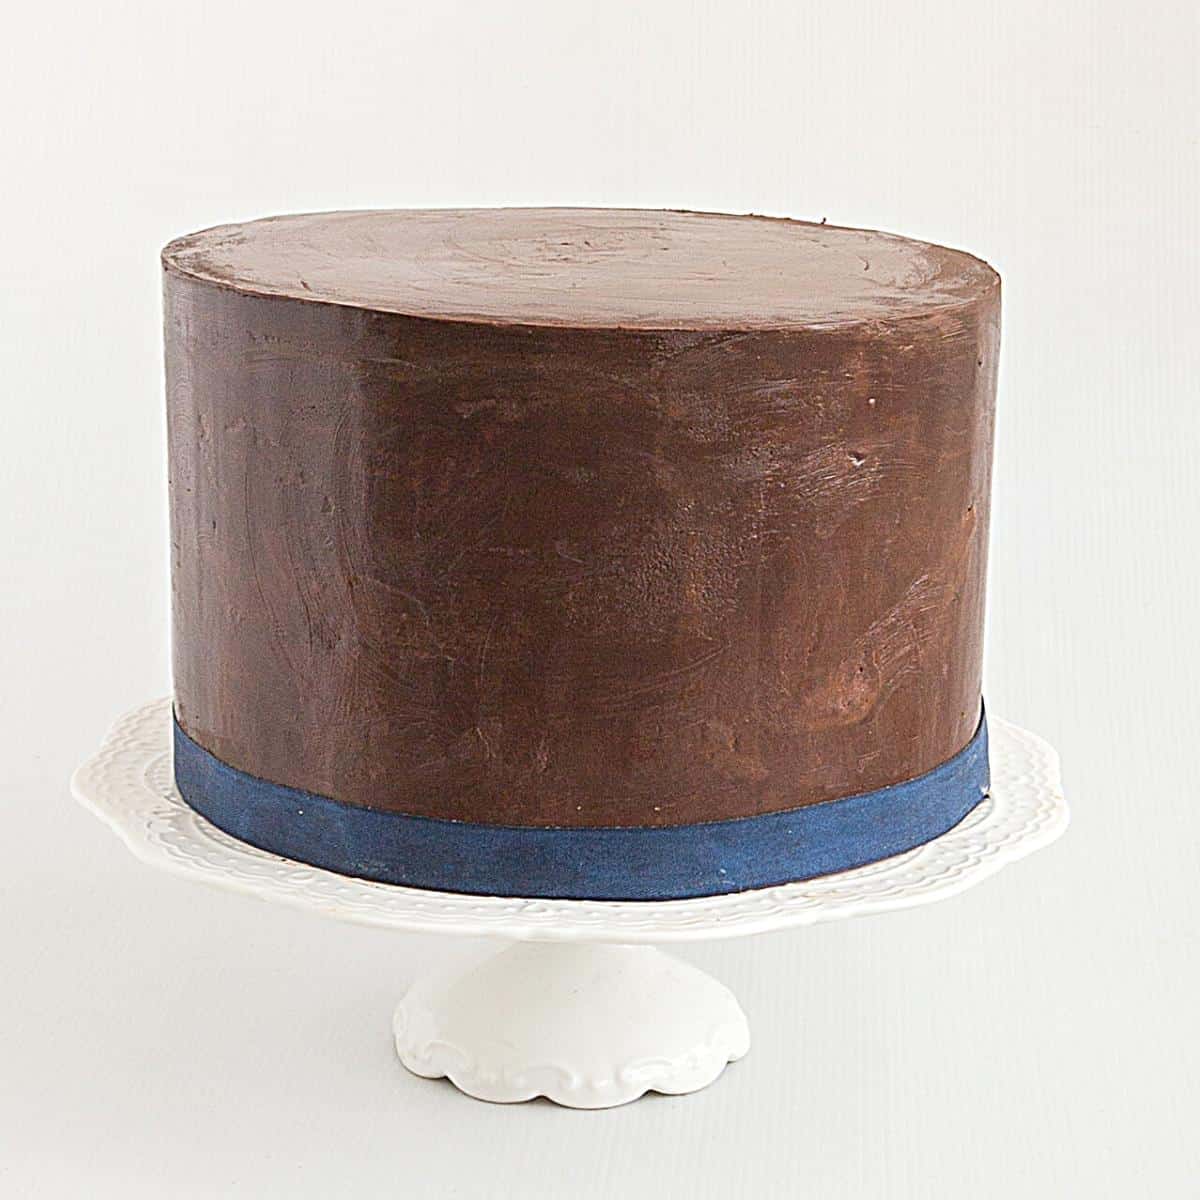 A cake frosted with ganache.